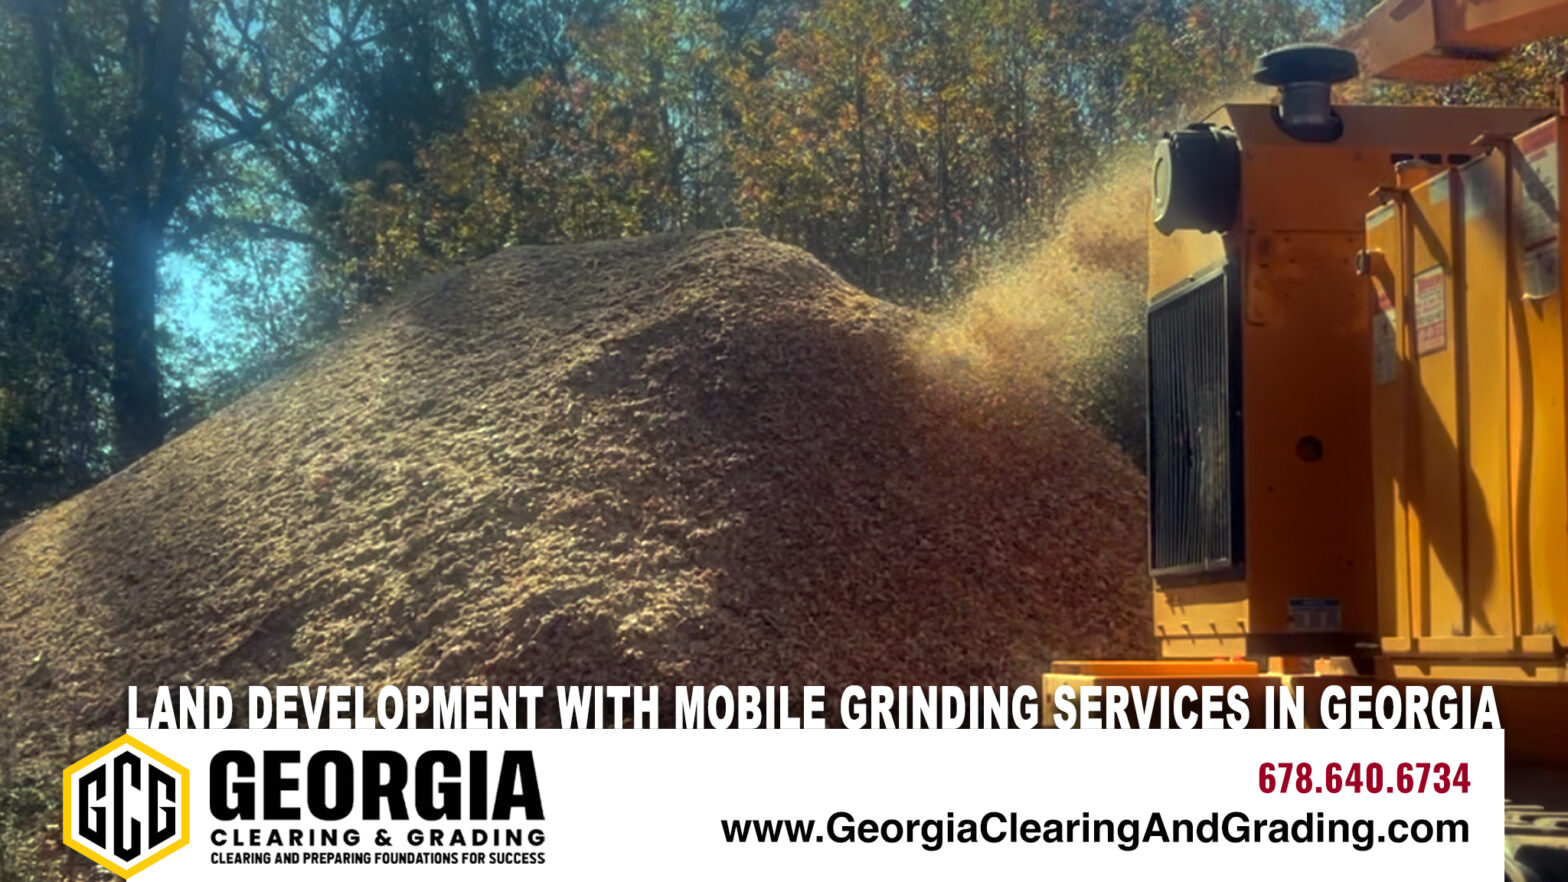 Mobile Grinding Services in Georgia